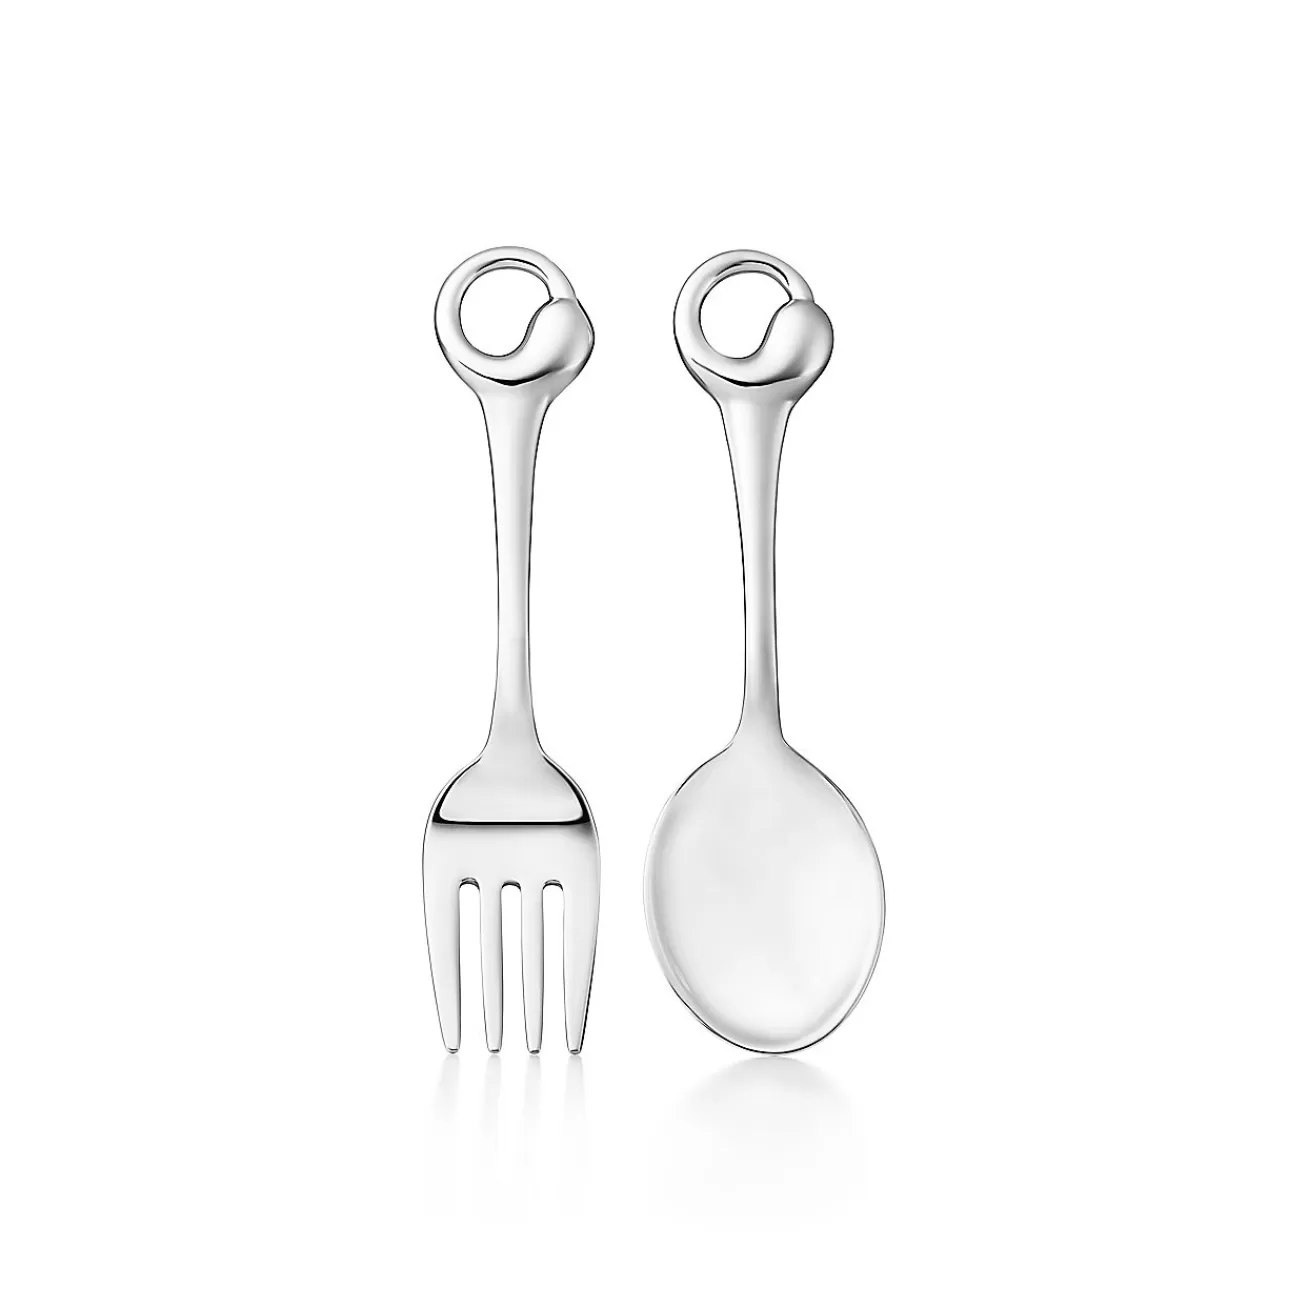 Tiffany & Co. Elsa Peretti® Eternal Circle child's fork and spoon set in sterling silver. | ^ Baby | Baby